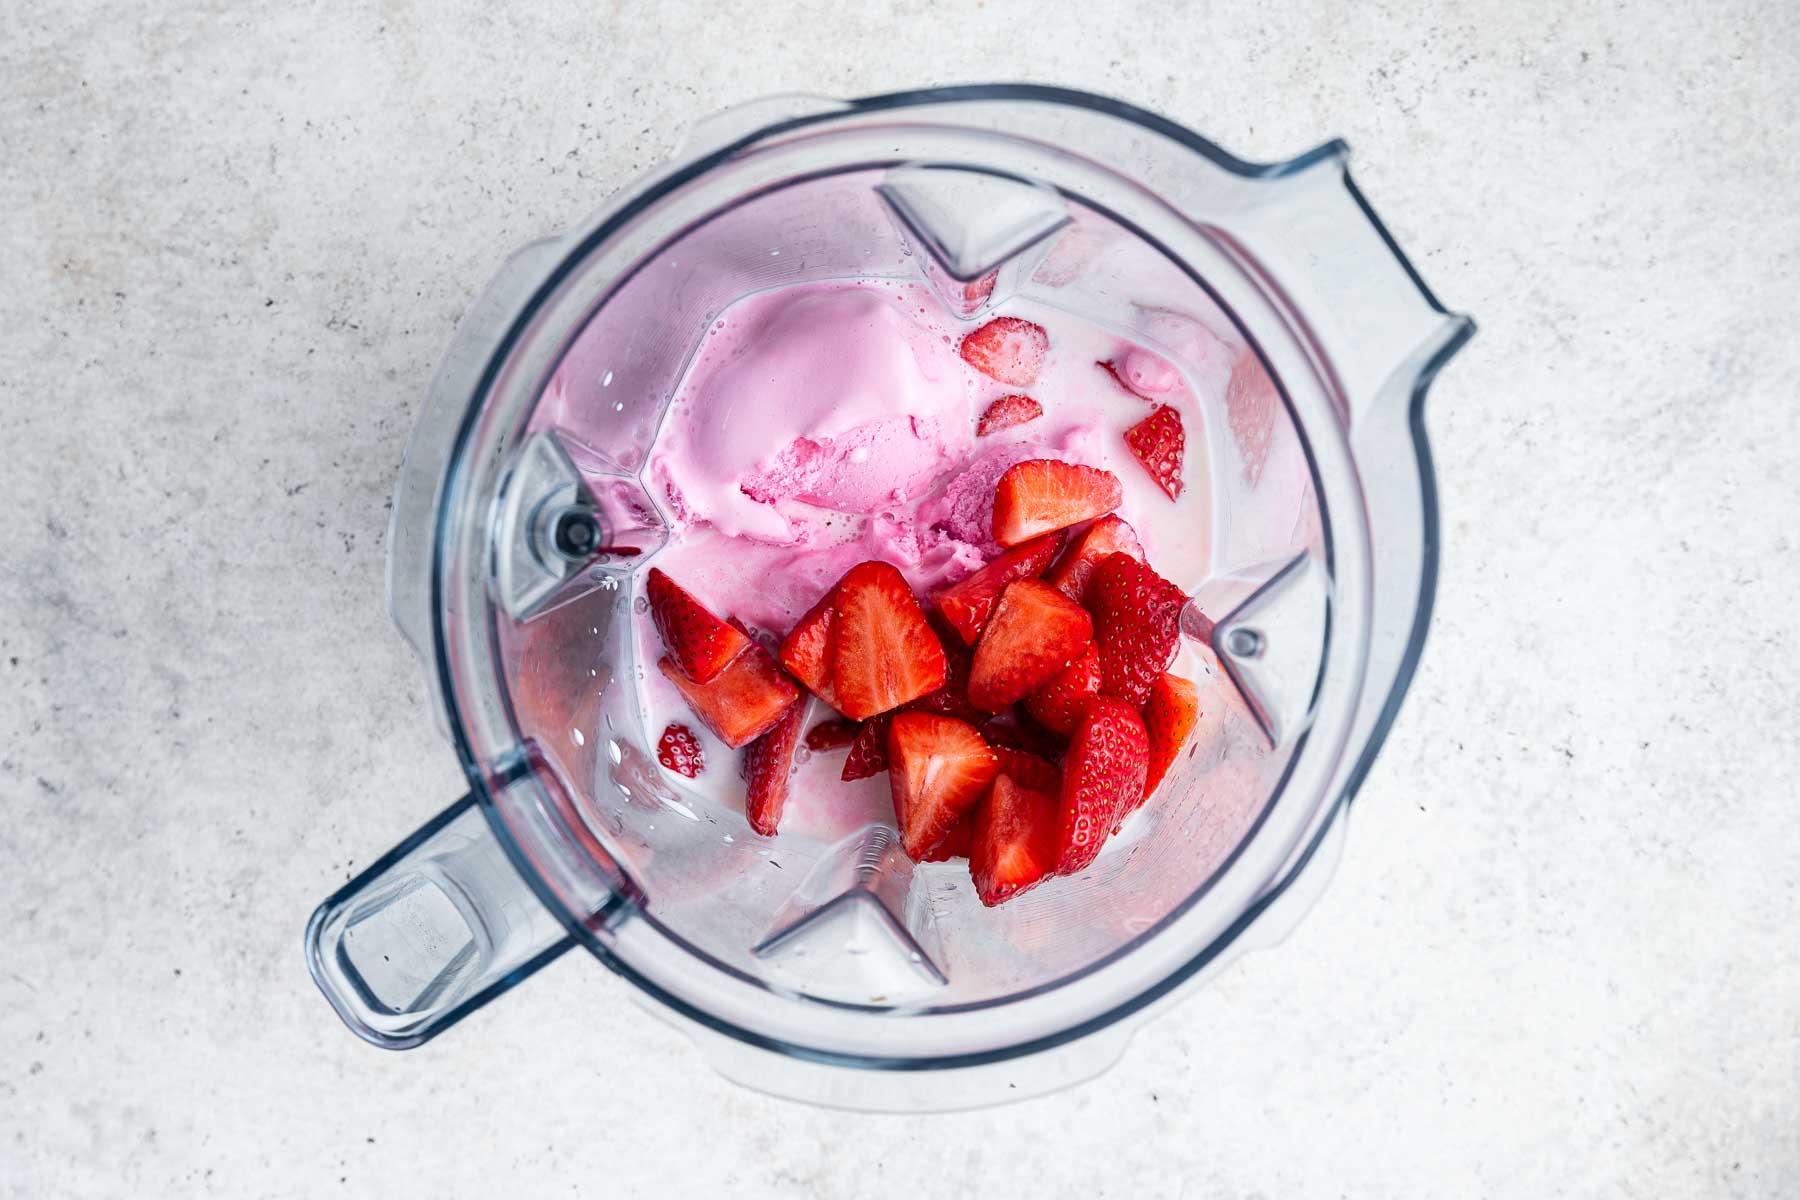 Blender with scoops of strawberry ice cream, strawberries and milk.